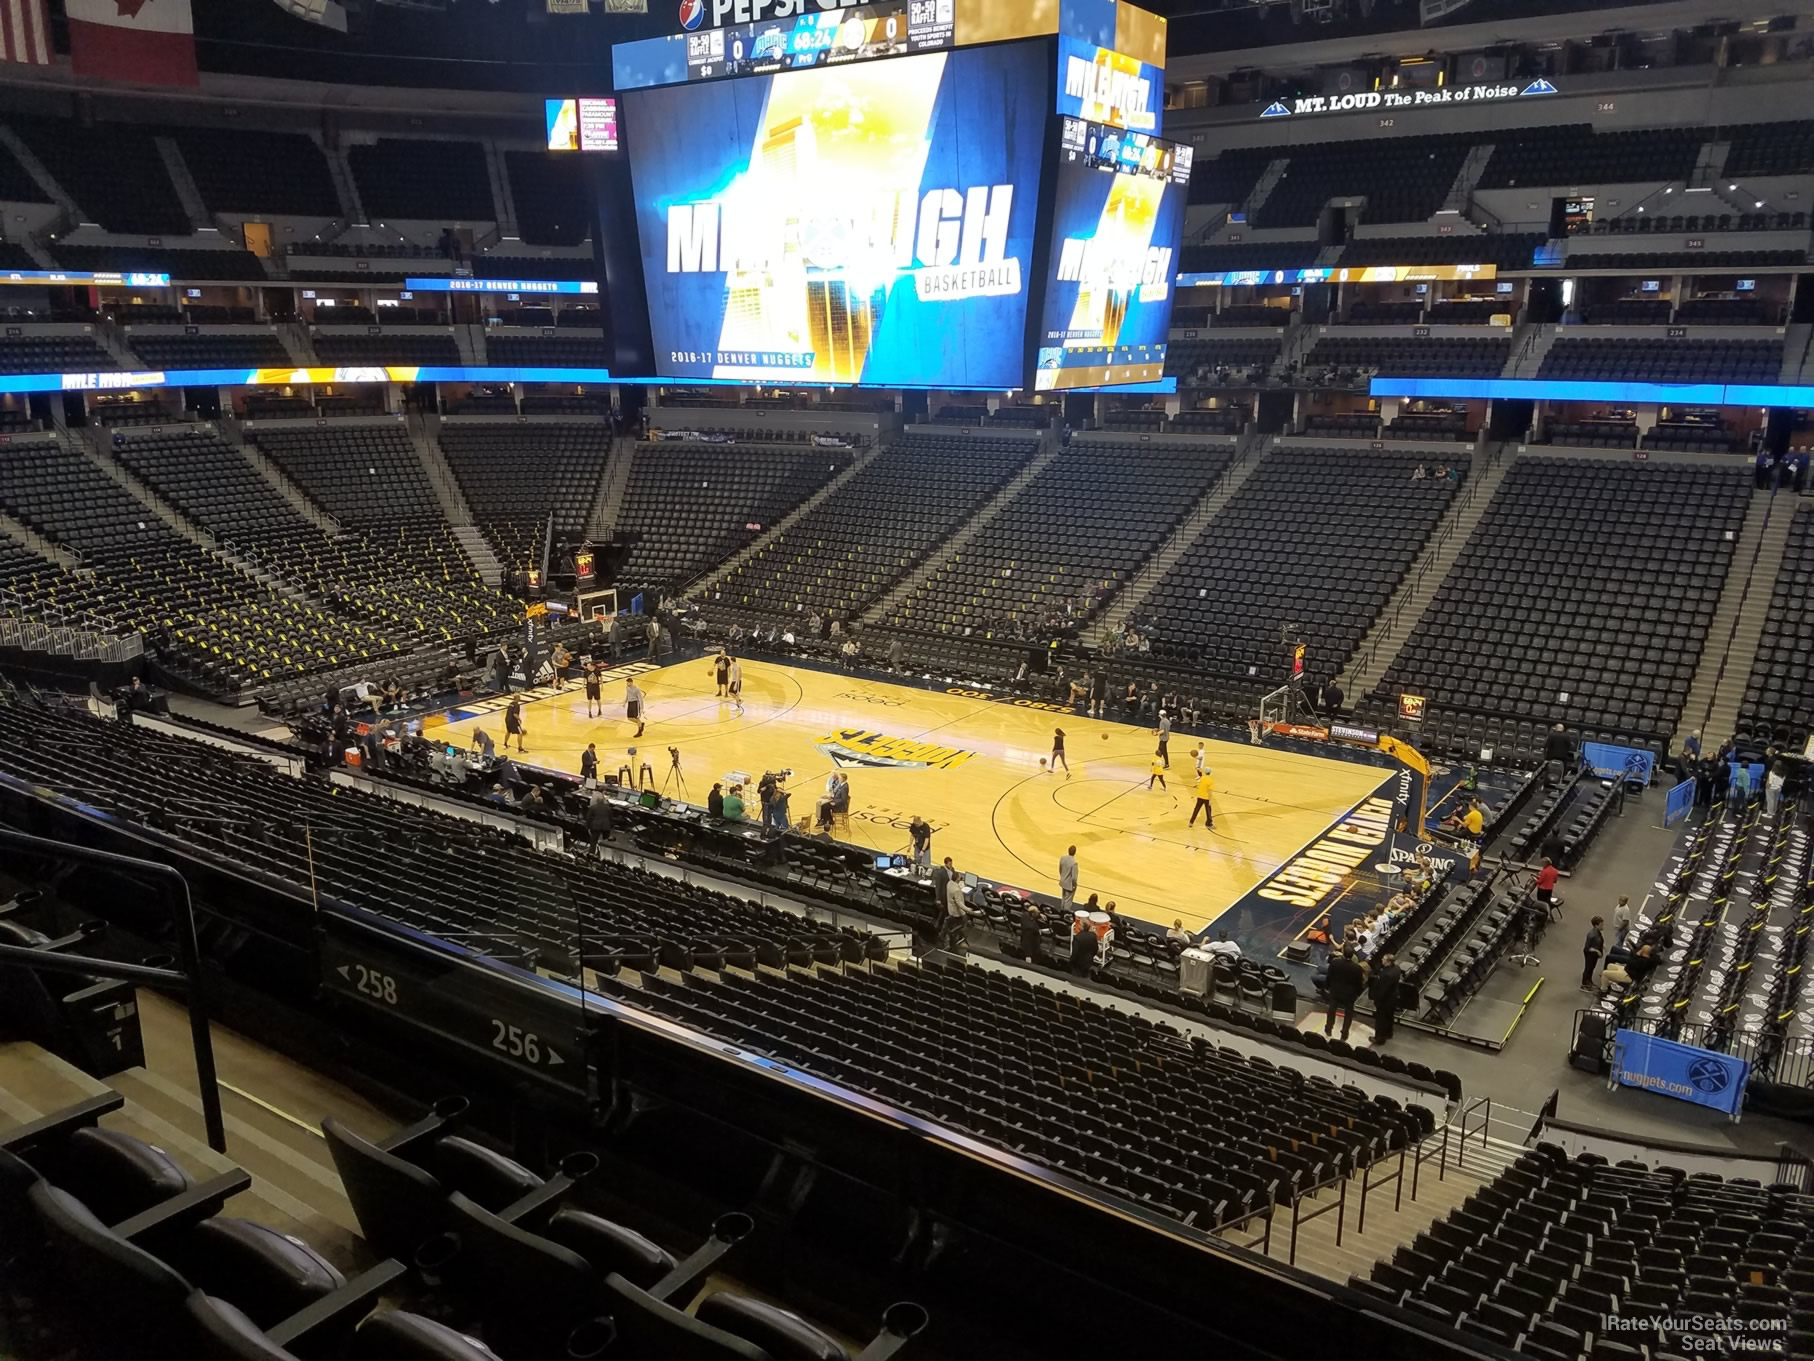 section 256, row 4 seat view  for basketball - ball arena